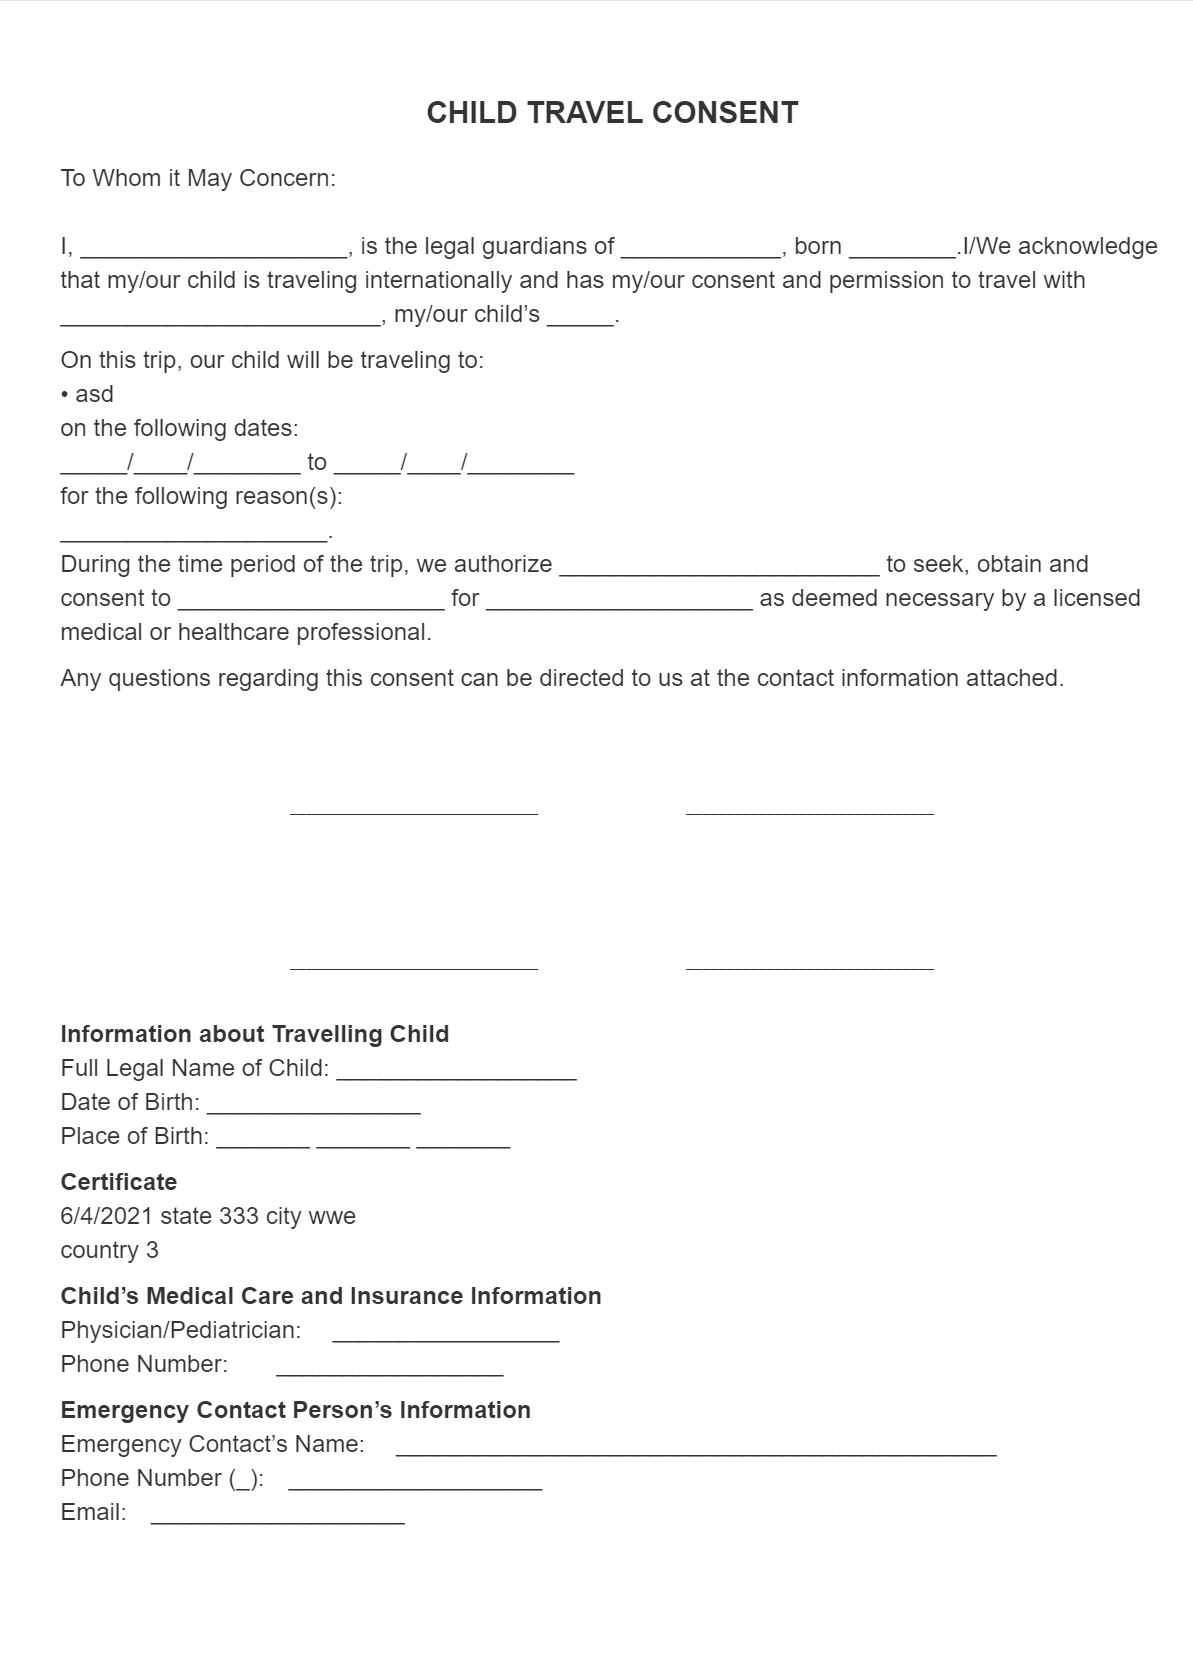 notary-printable-child-travel-consent-form-printable-forms-free-online